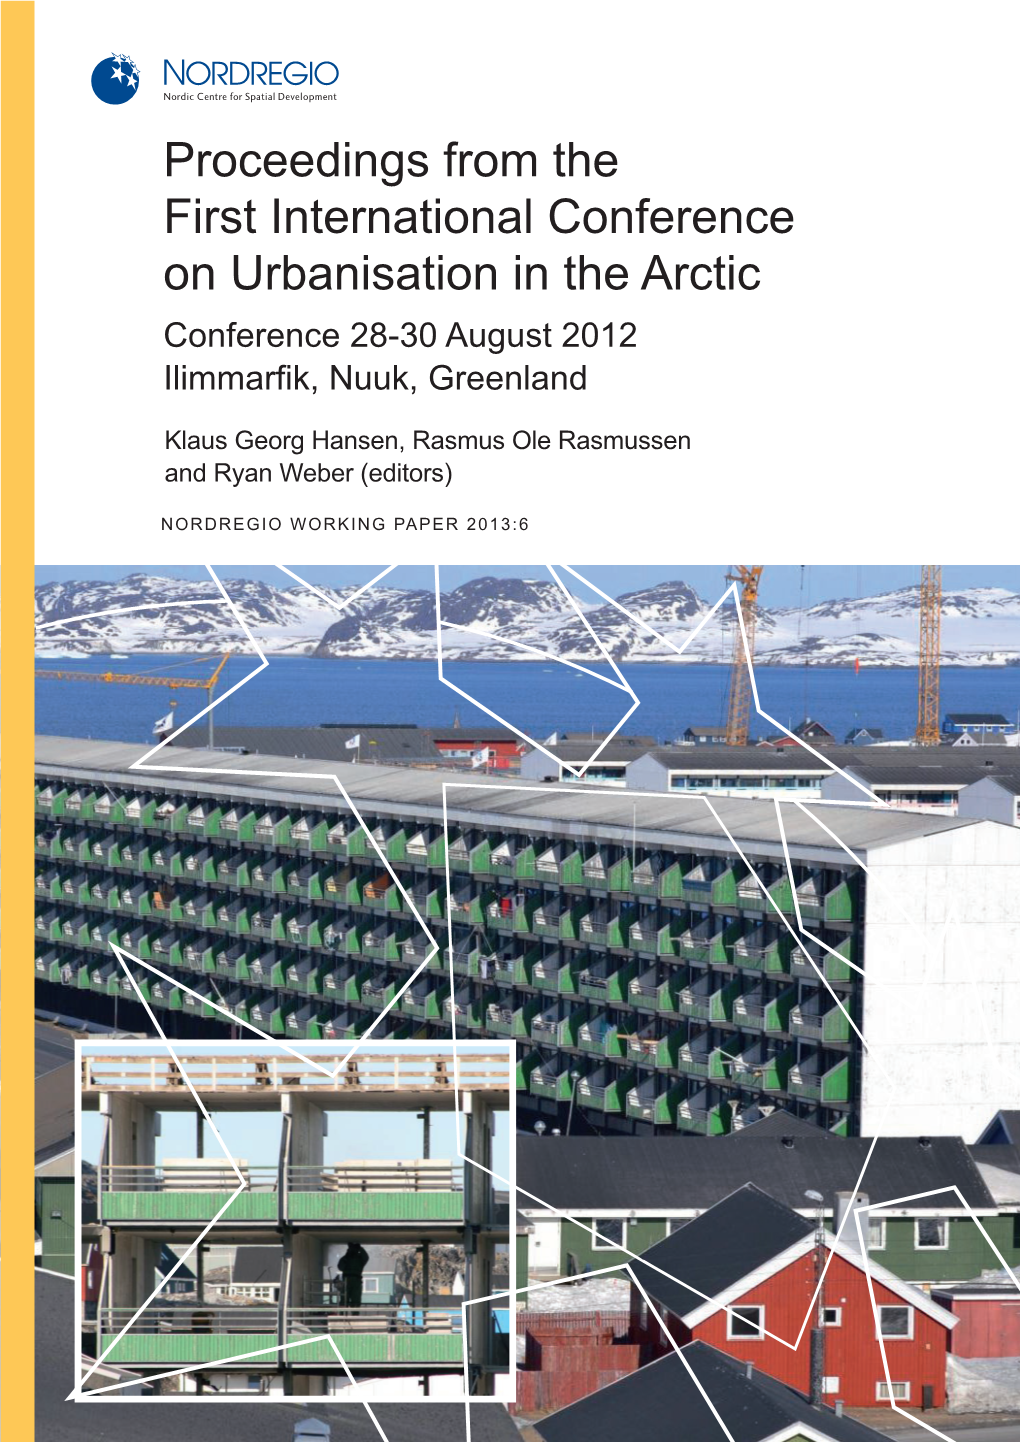 Proceedings from the First International Conference on Urbanisation in the Arctic Conference 28-30 August 2012 Ilimmarfik, Nuuk, Greenland